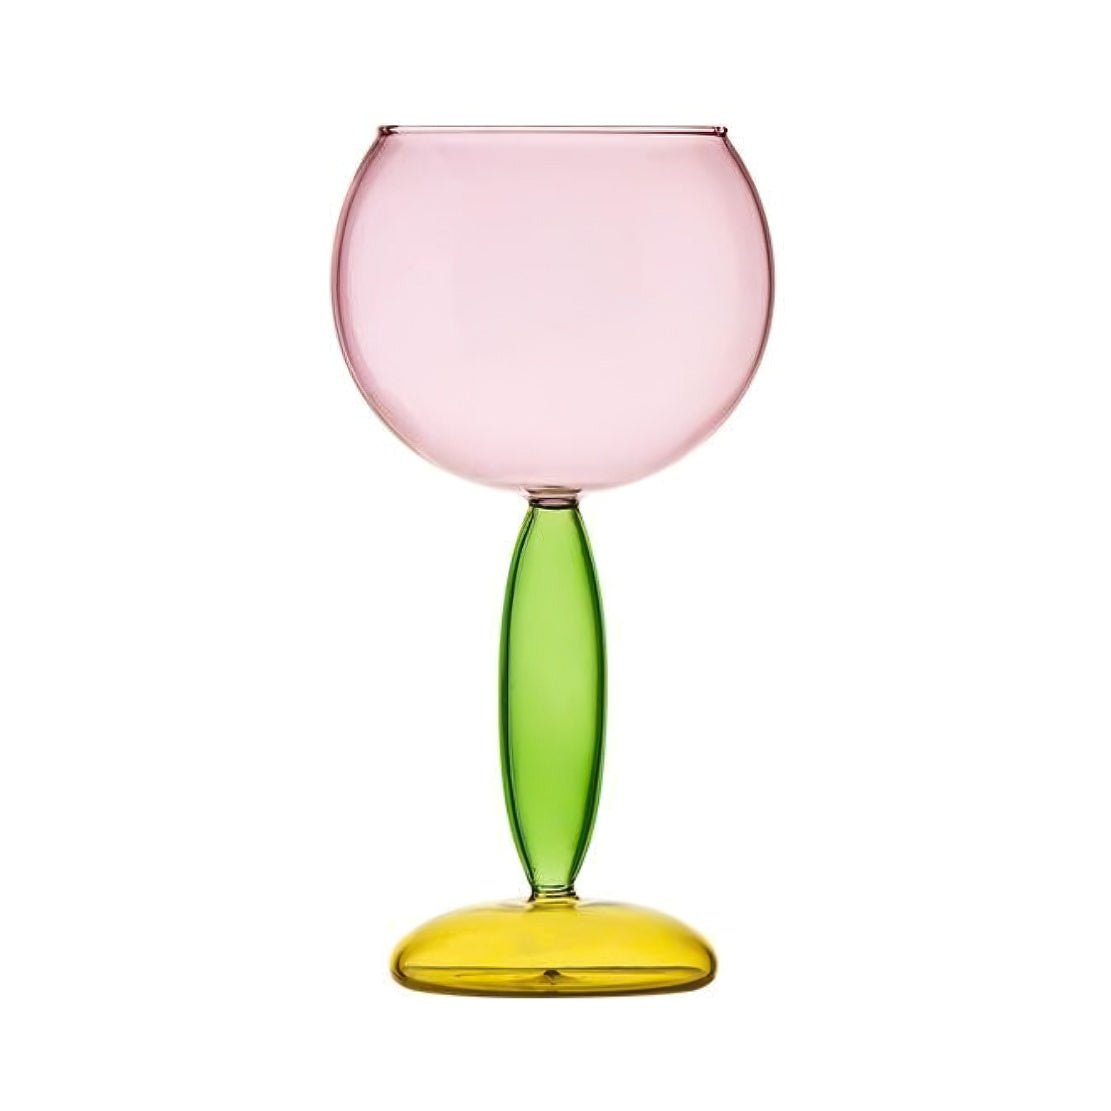 Pink glass goblet with green stem and yellow bottom.